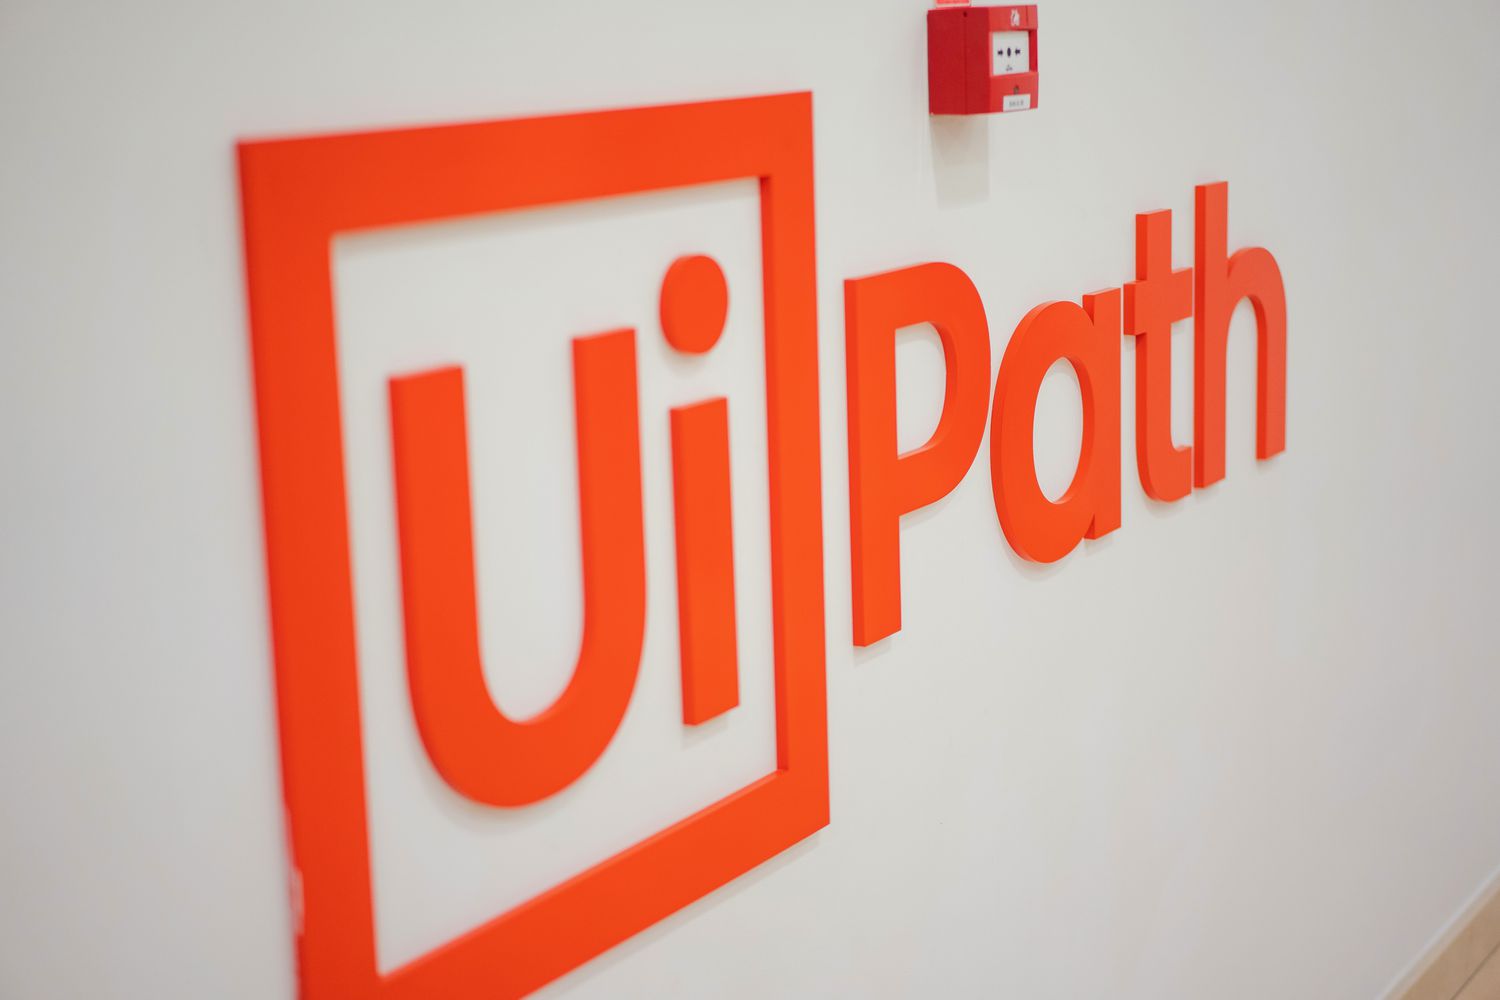 uipaths-transformation-from-rpa-to-general-automation-and-ai